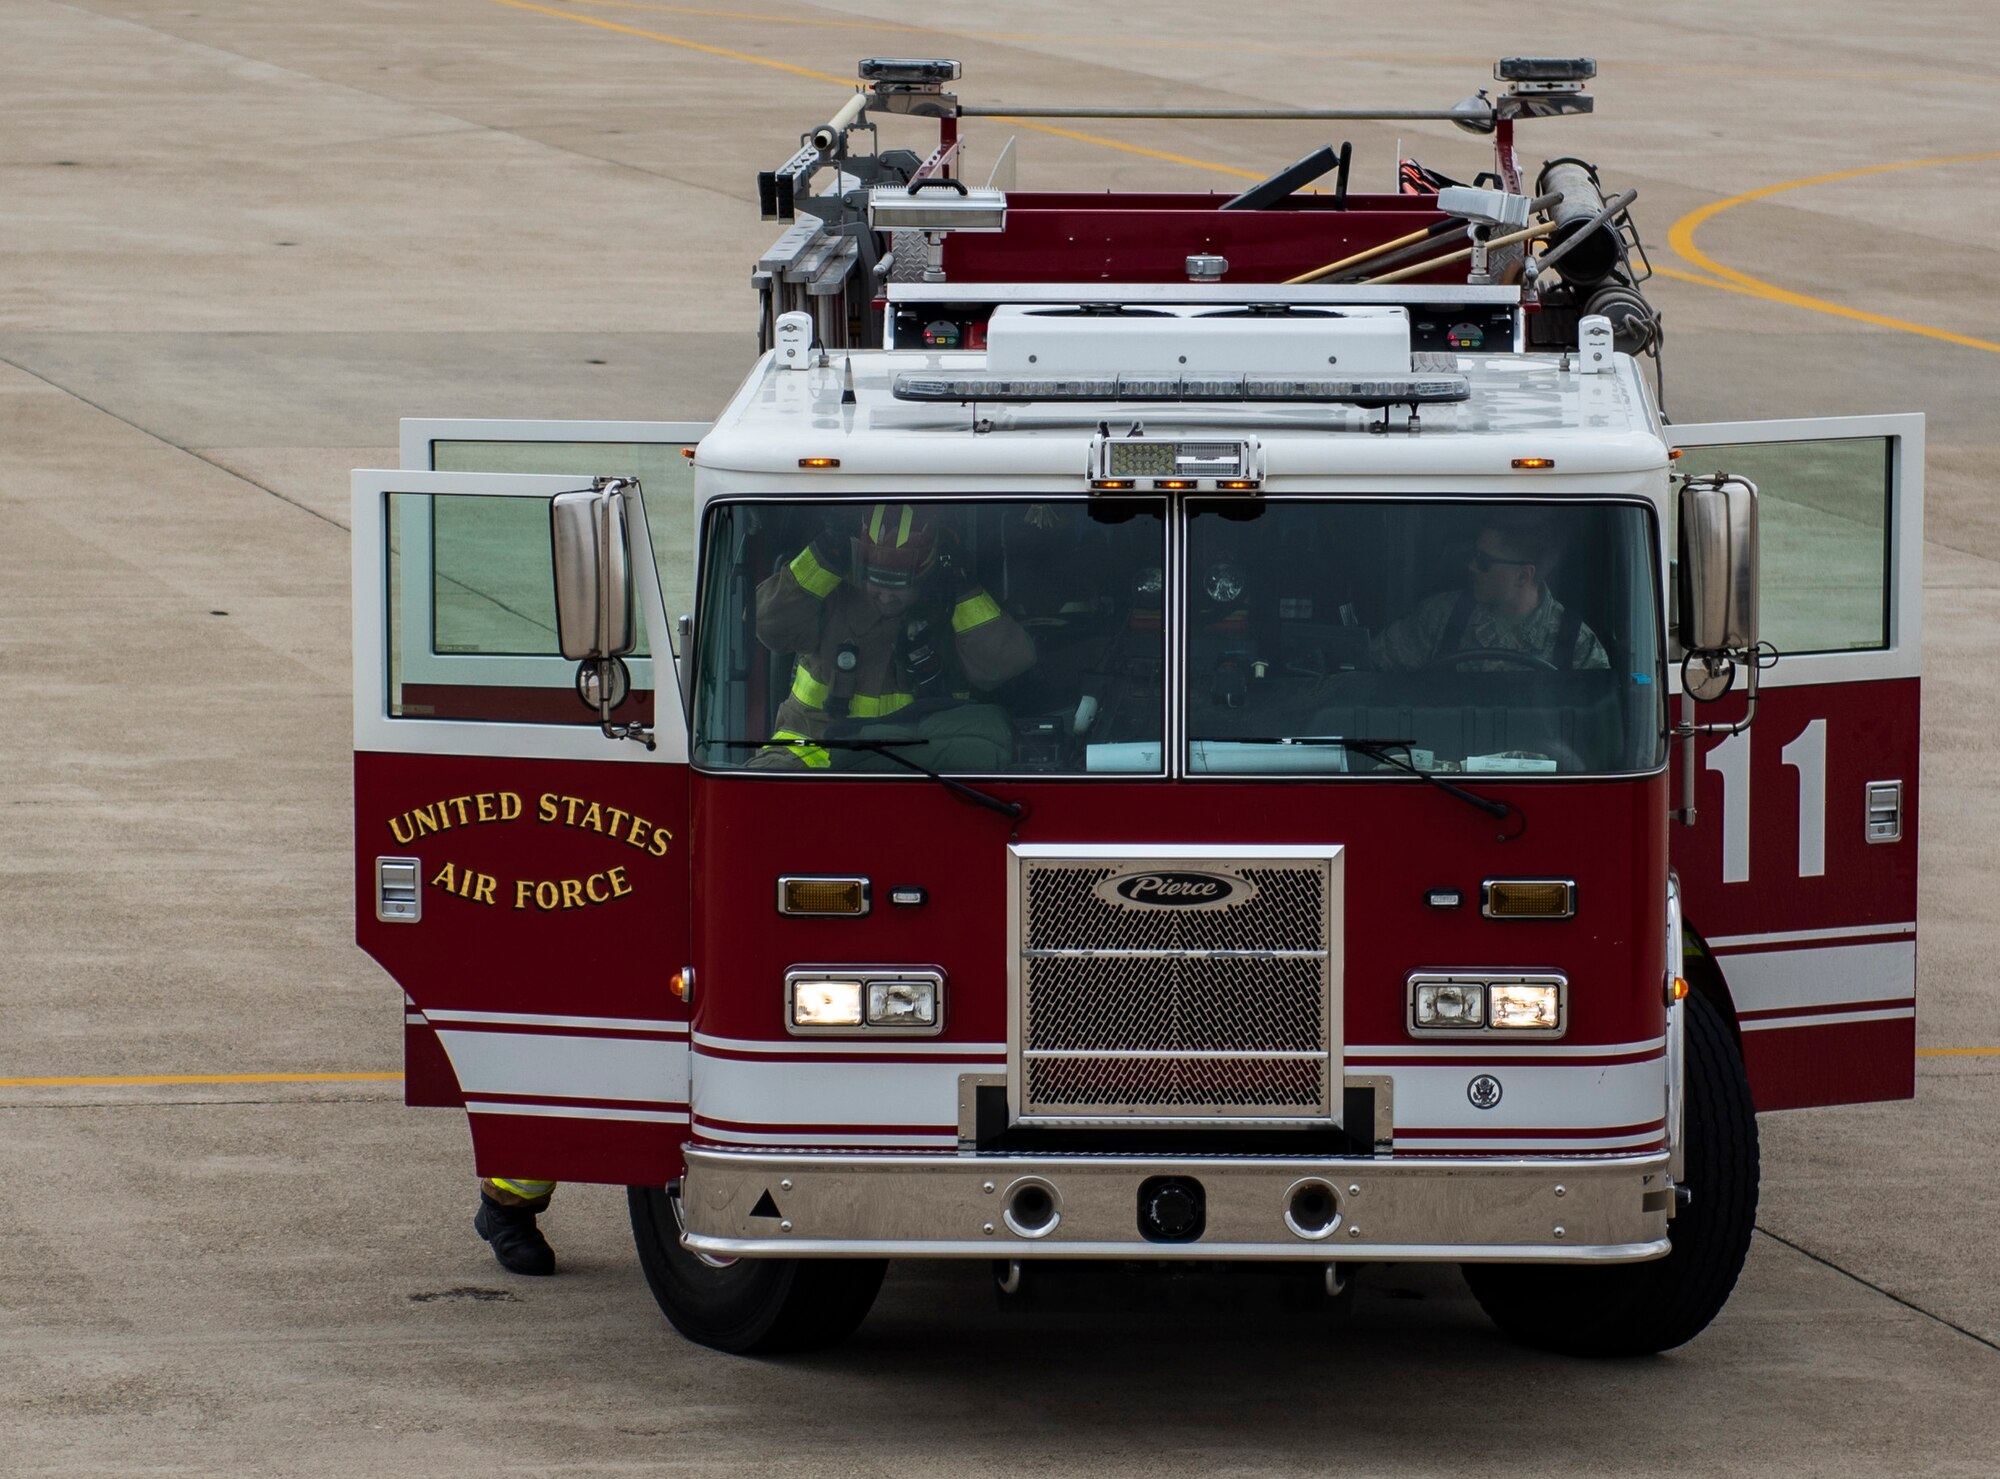 Fire fighters from the 8th Civil Engineer Squadron disembark their fire truck at Kunsan Air Base, Republic of Korea, March 26, 2019. Fire fighters have six minutes to respond to a fall victim being suspended by their safety harness before the situation can become life-threatening. (U.S. Air Force phot by Senior Airman Stefan Alvarez)